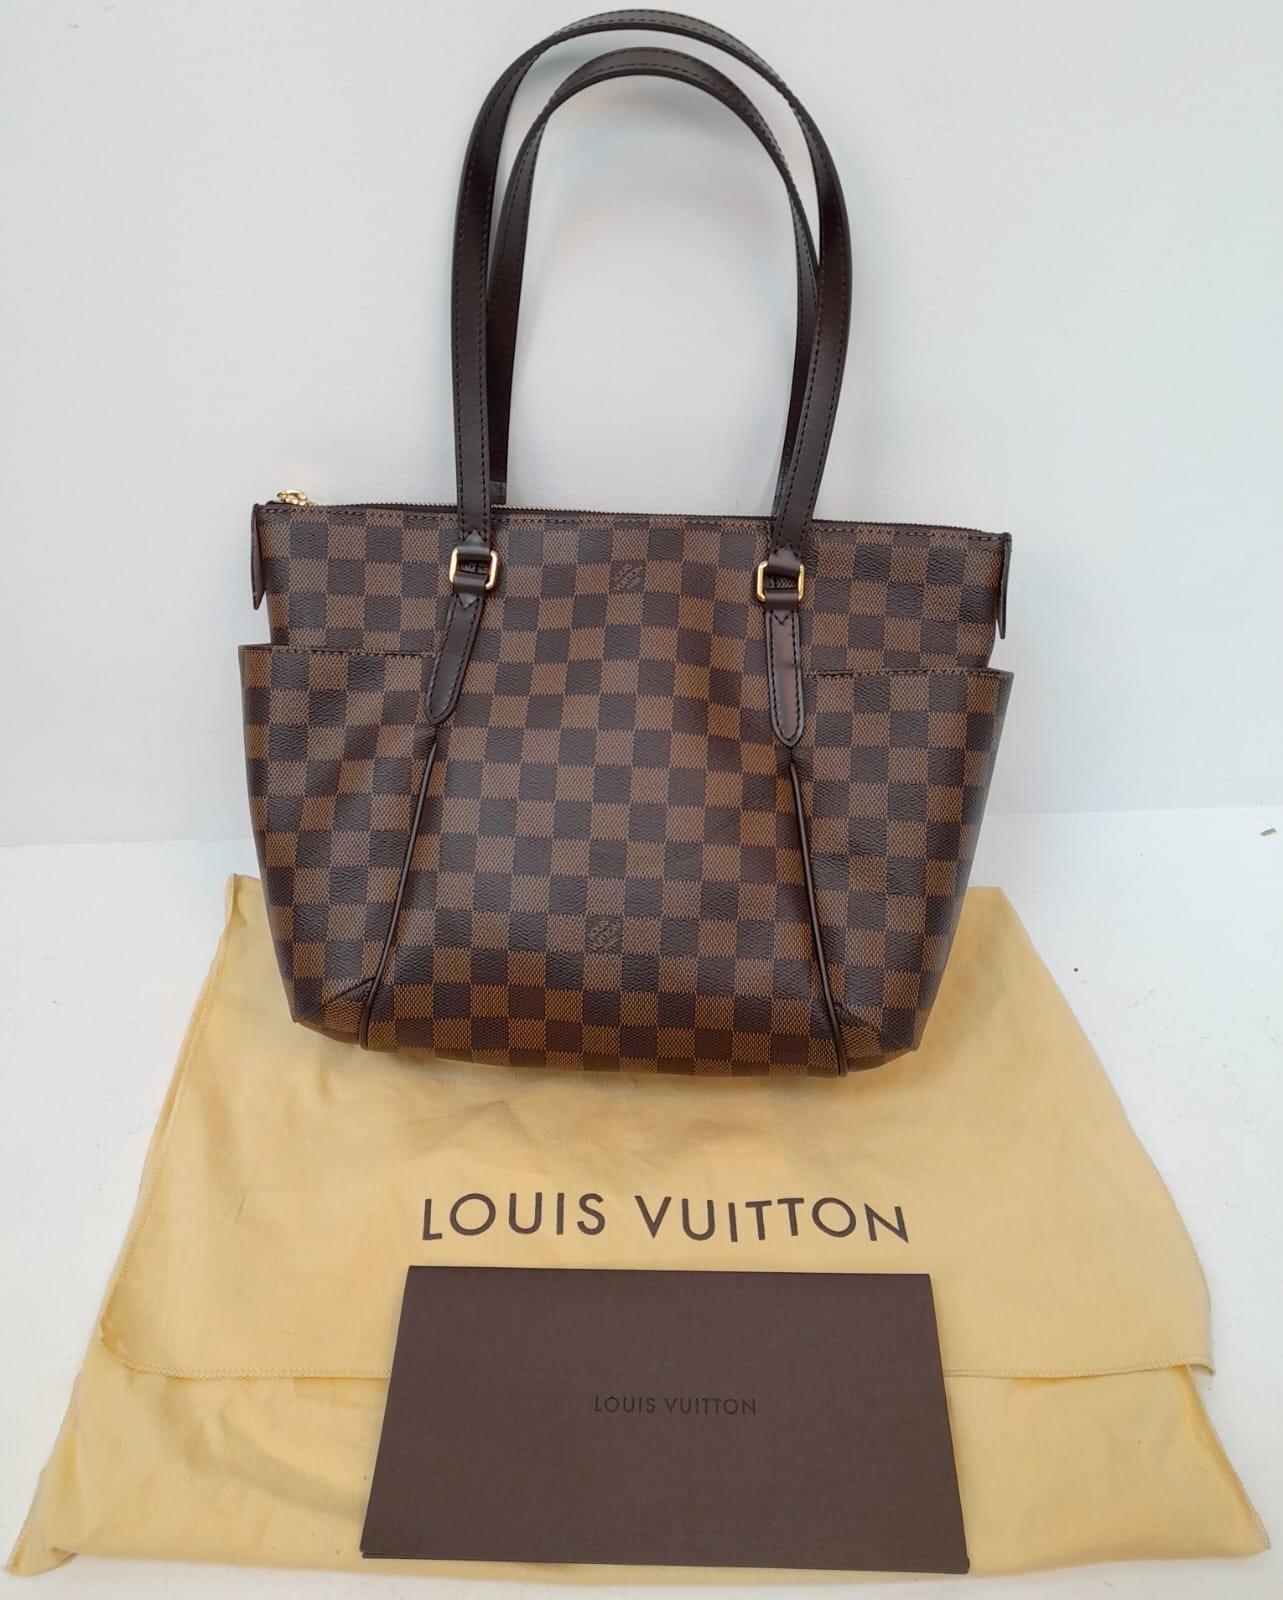 A Louis Vuitton Damier Ebene 'Totally PM' Shoulder Bag. Leather exterior with gold-toned hardware, - Image 4 of 4